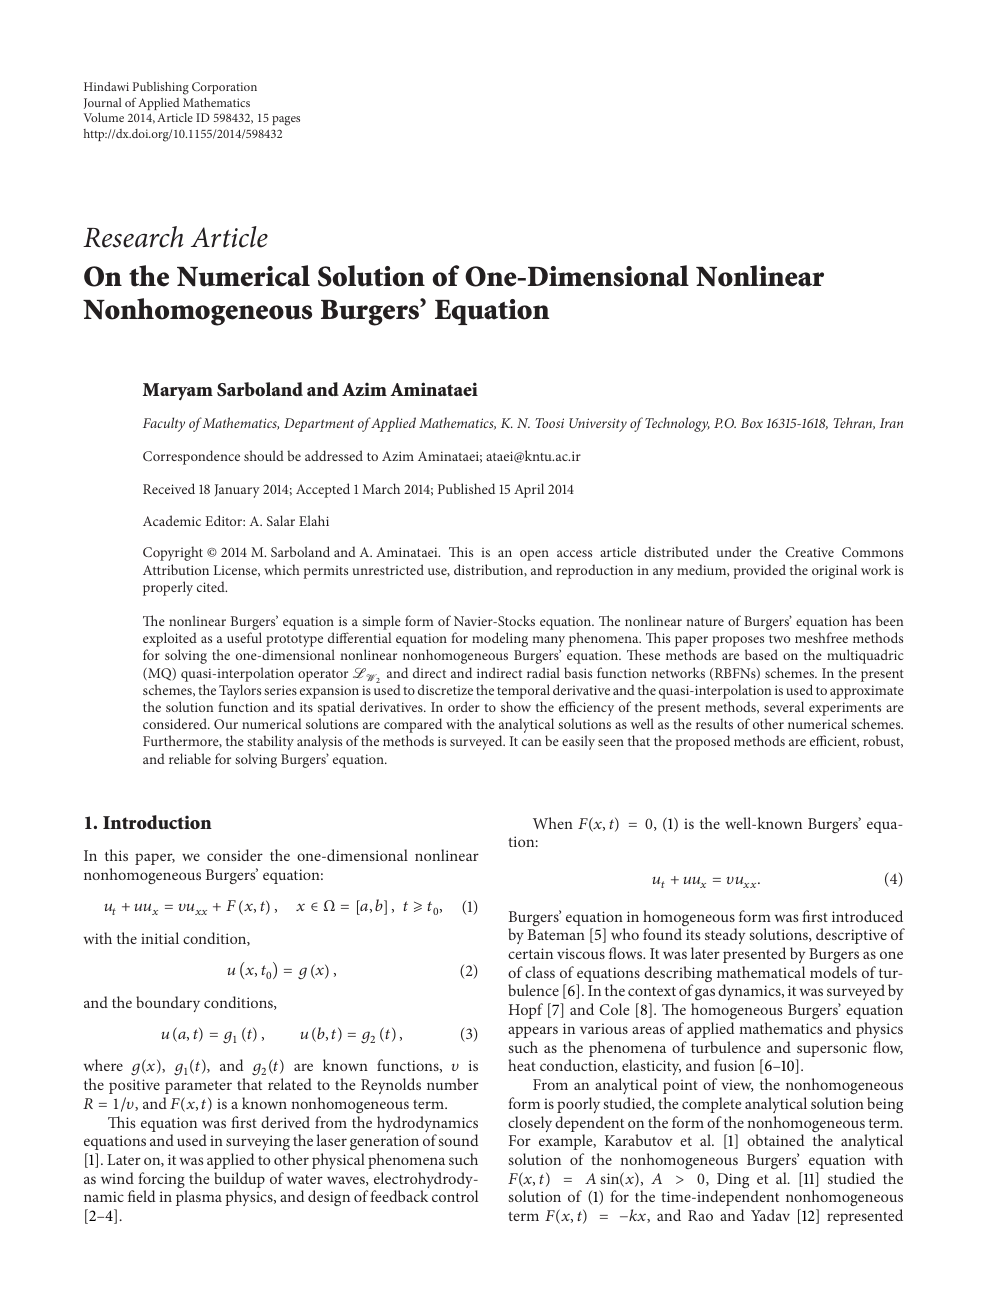 On The Numerical Solution Of One Dimensional Nonlinear Nonhomogeneous Burgers Equation Topic Of Research Paper In Mathematics Download Scholarly Article Pdf And Read For Free On Cyberleninka Open Science Hub